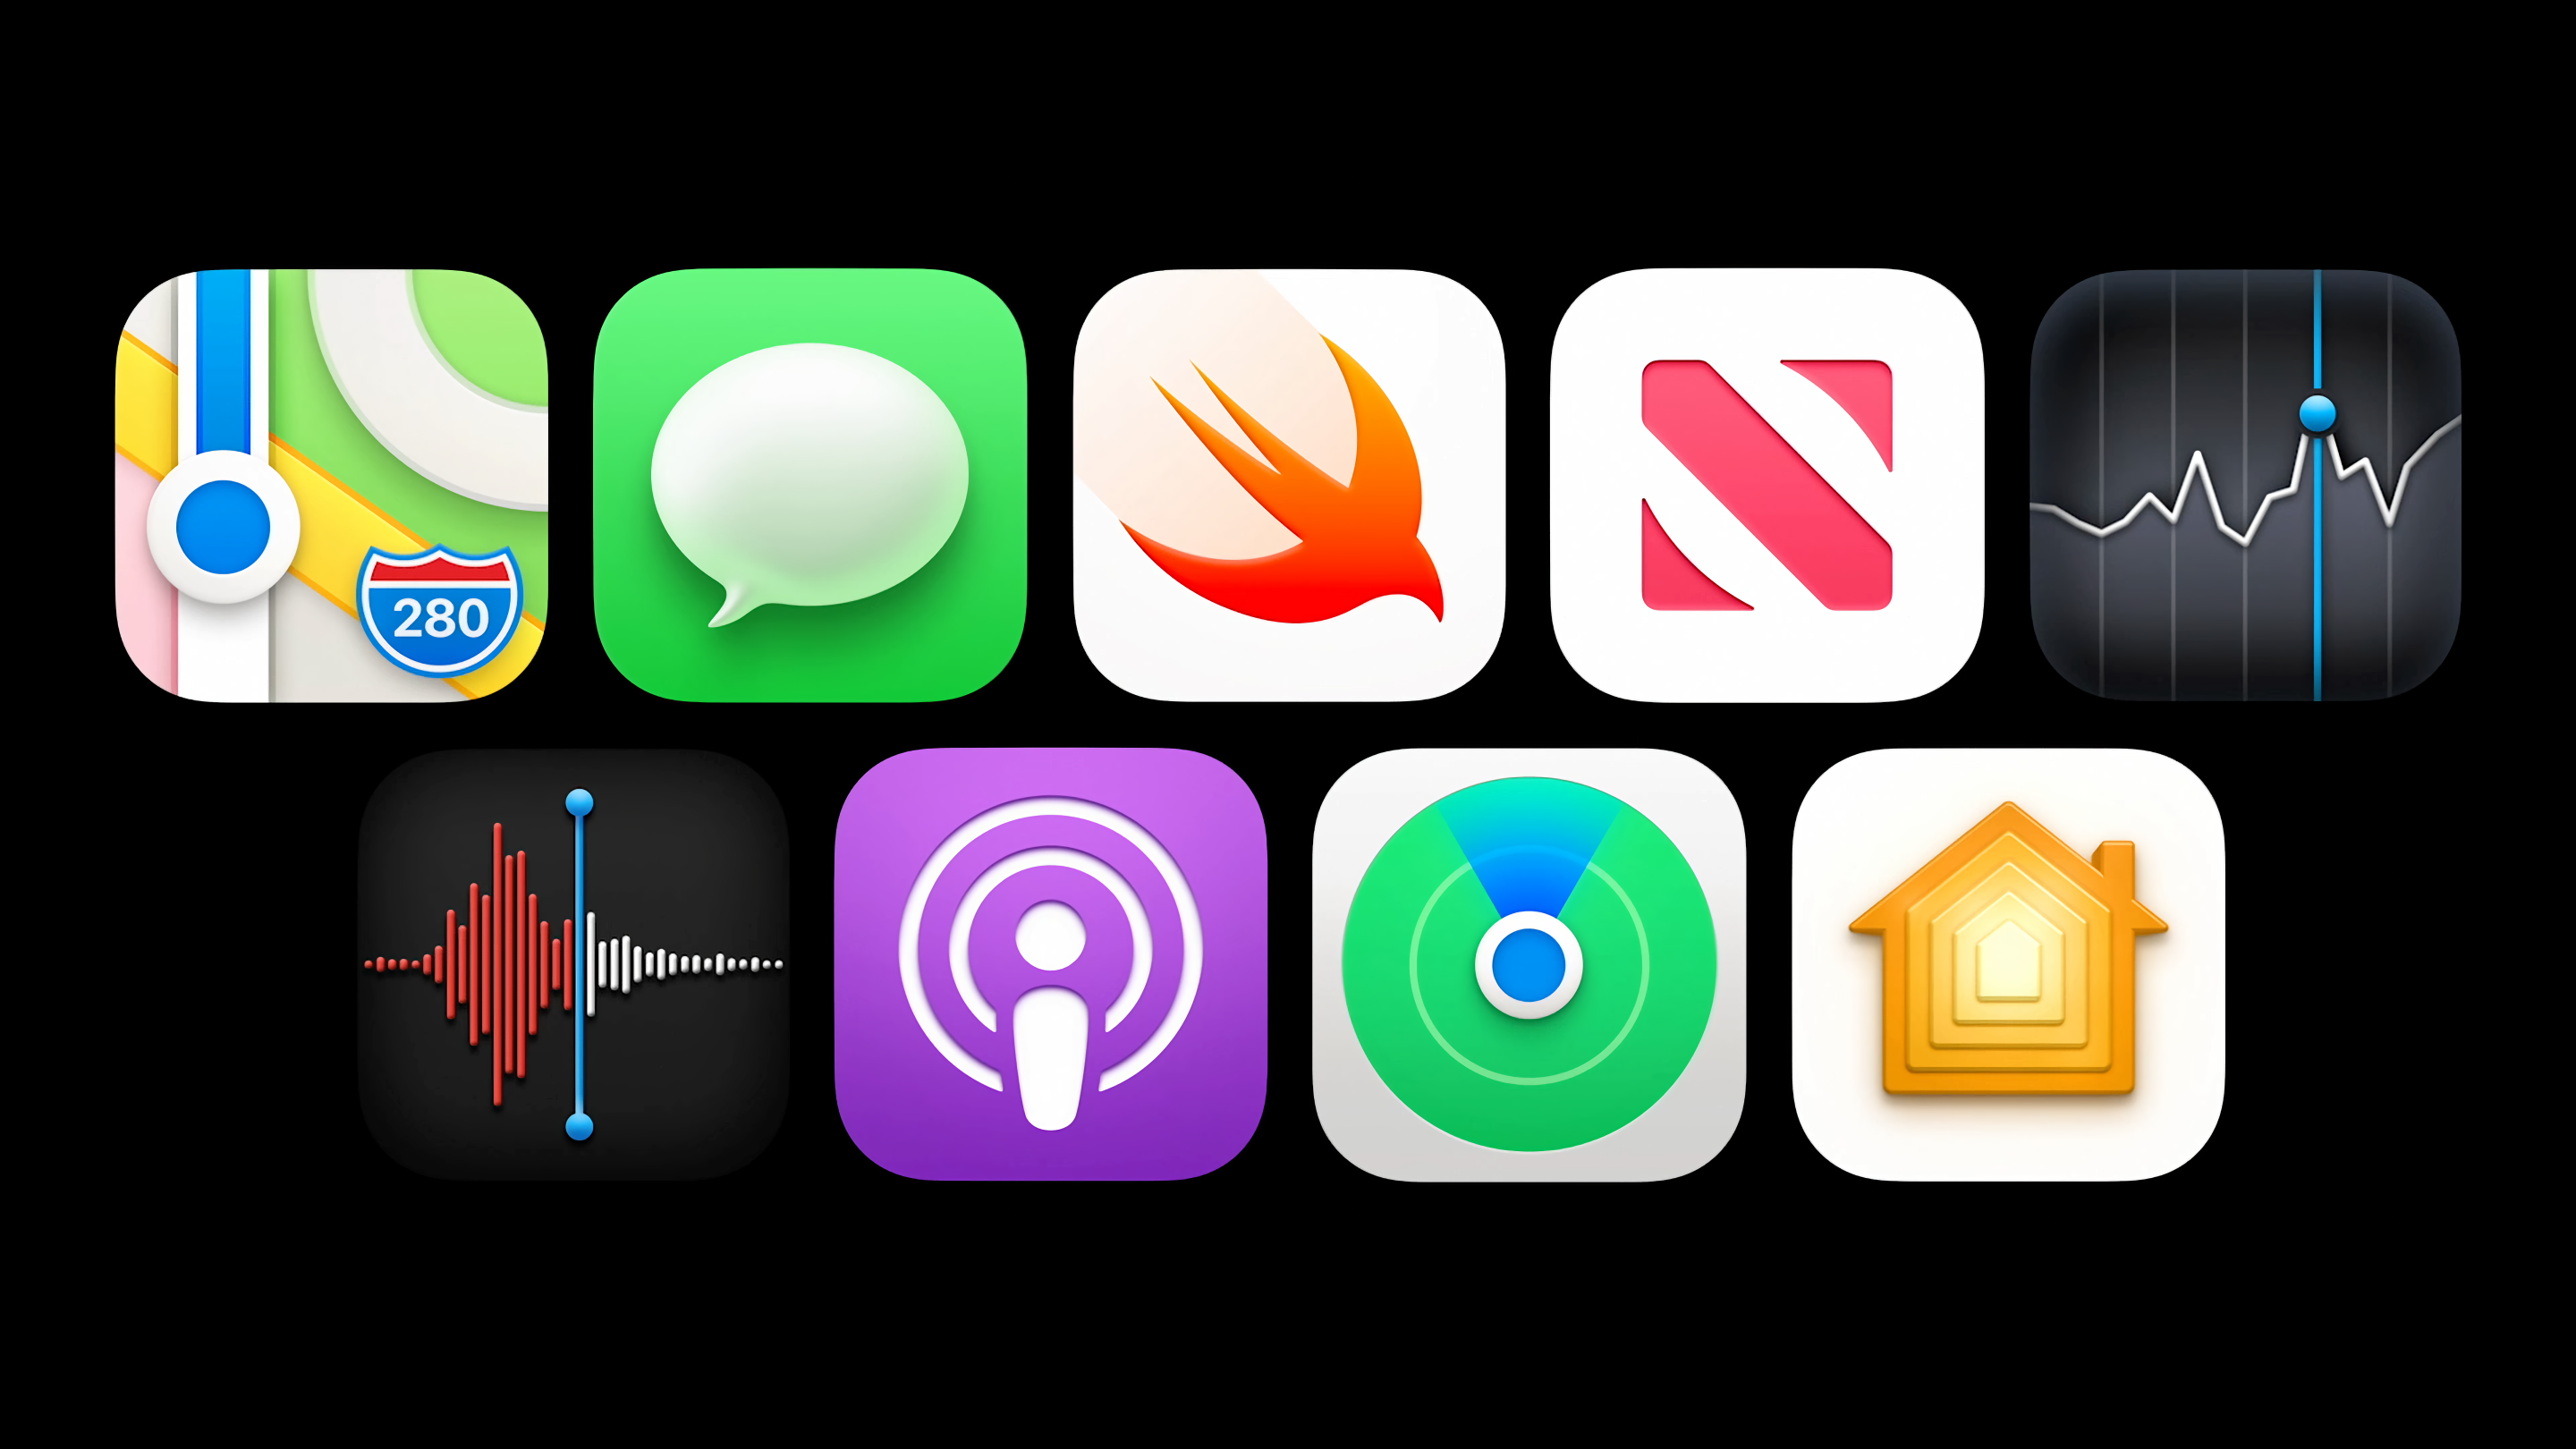 The original four Mac Catalyst apps – Stocks, News, Voice Memos, and Home – have been joined by five others.